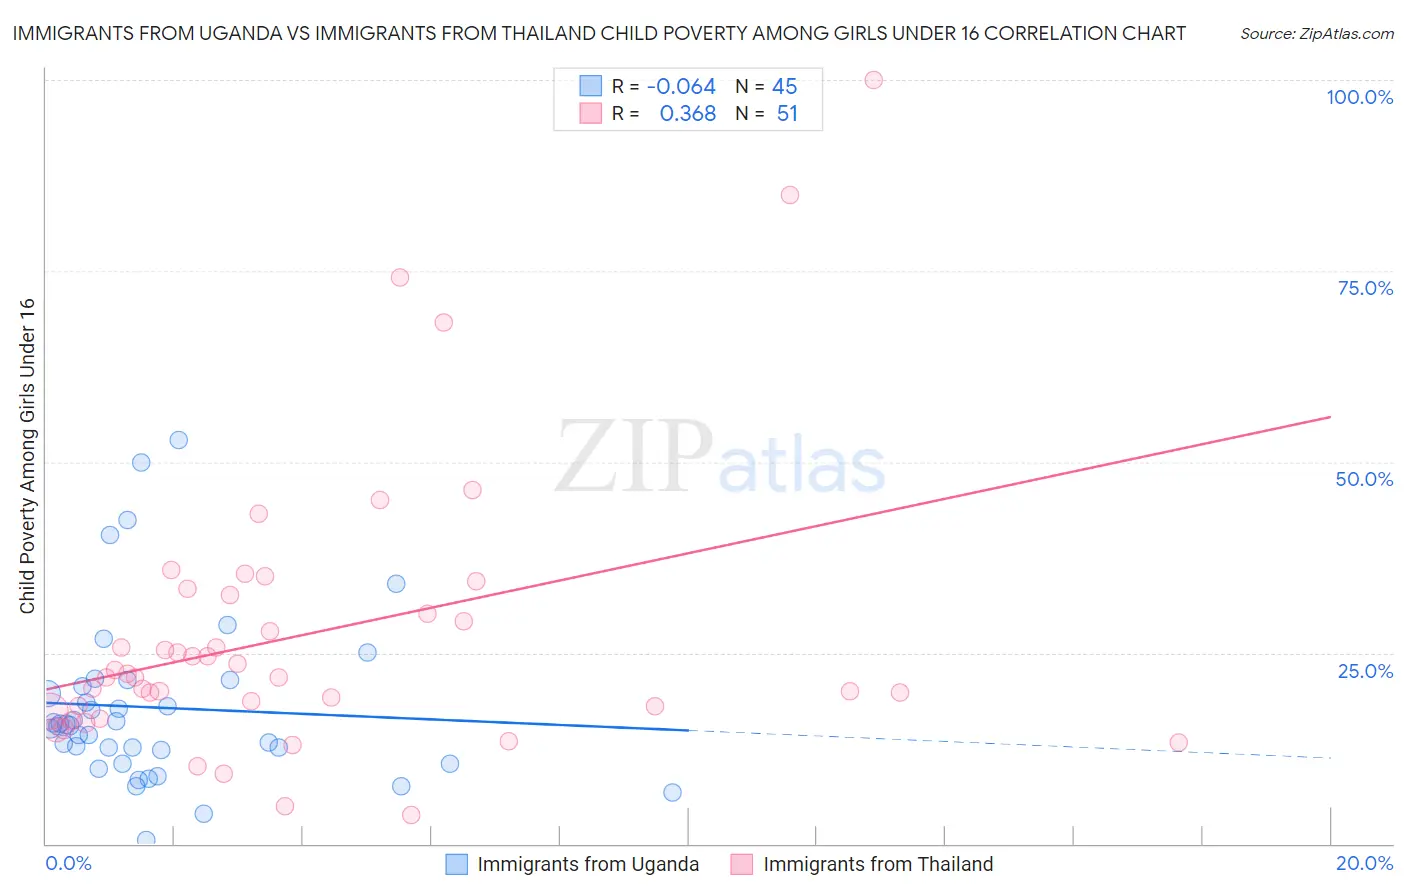 Immigrants from Uganda vs Immigrants from Thailand Child Poverty Among Girls Under 16